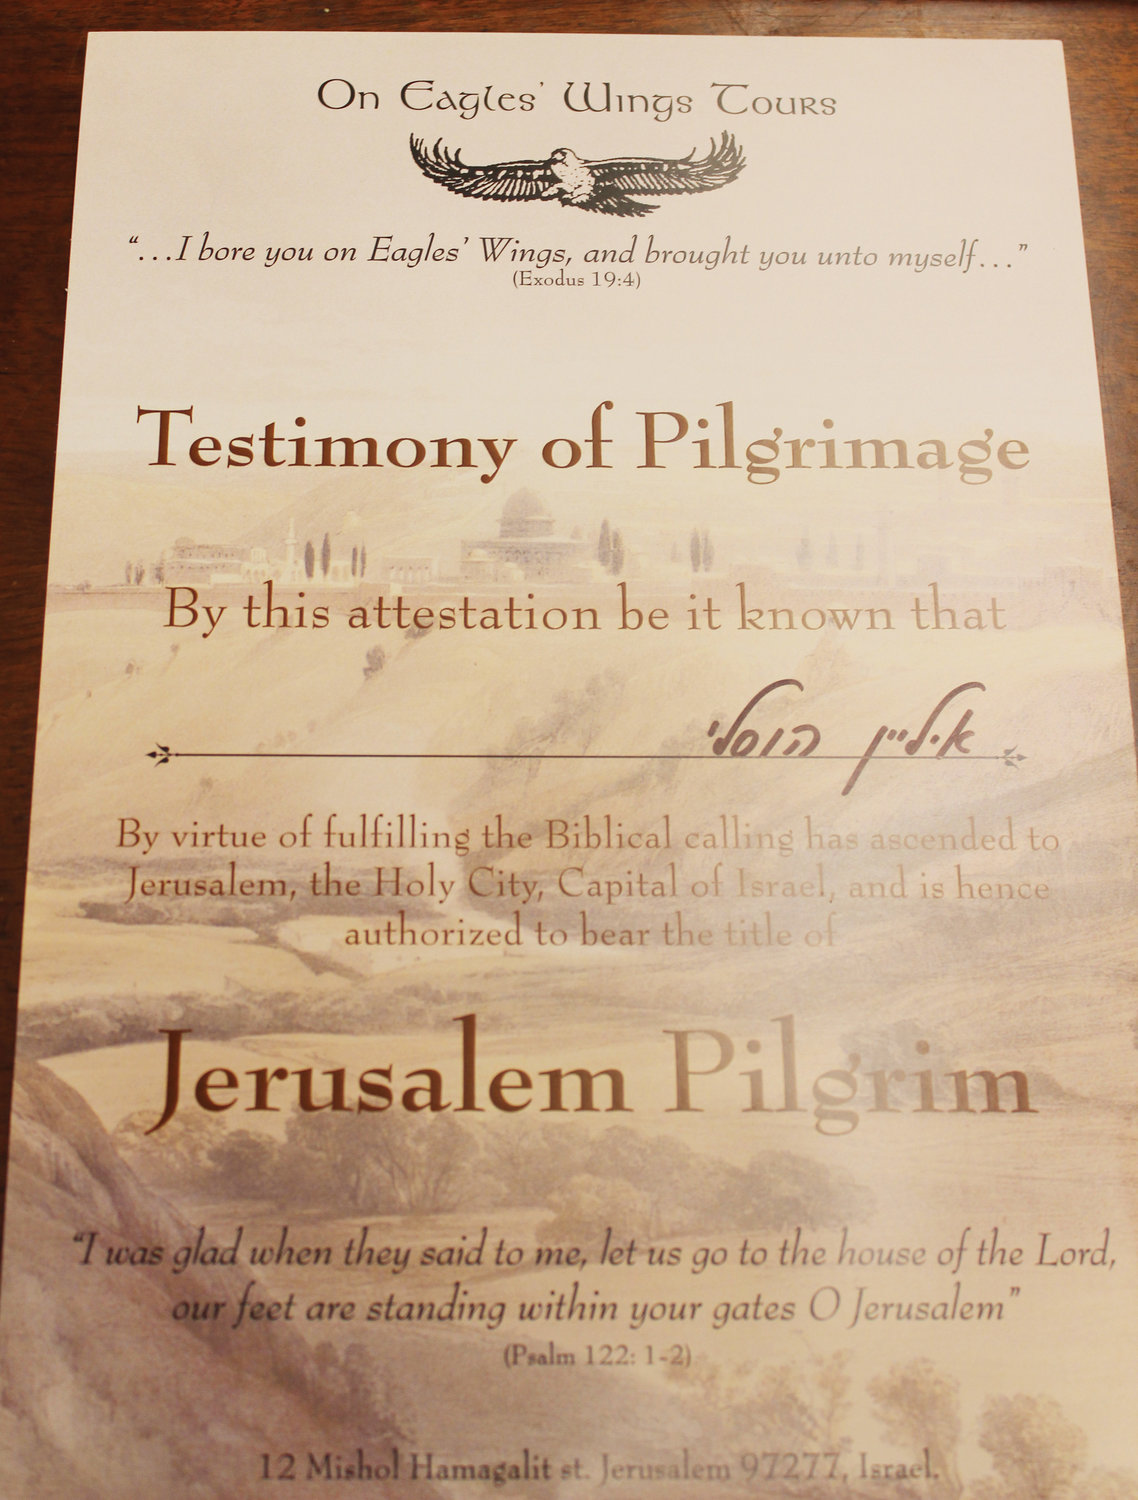 At the end of her visit to Israel, Elaine Howsley was certified a Jerusalem pilgrim. The certificate bears her name in Hebrew.